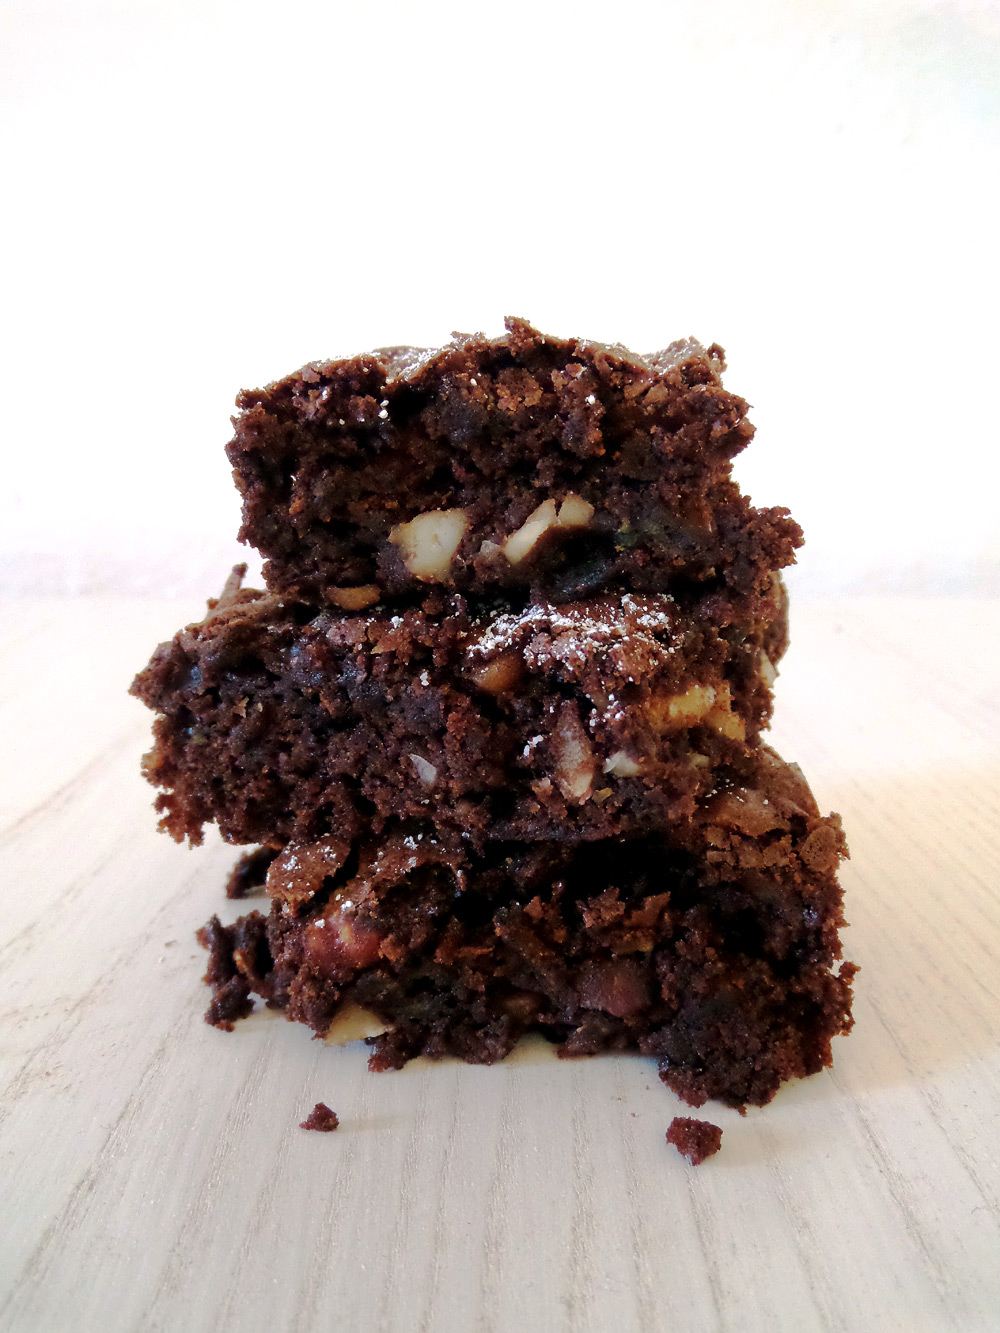 Foodista | Recipes, Cooking Tips, and Food News | Zucchini Cashew Brownies